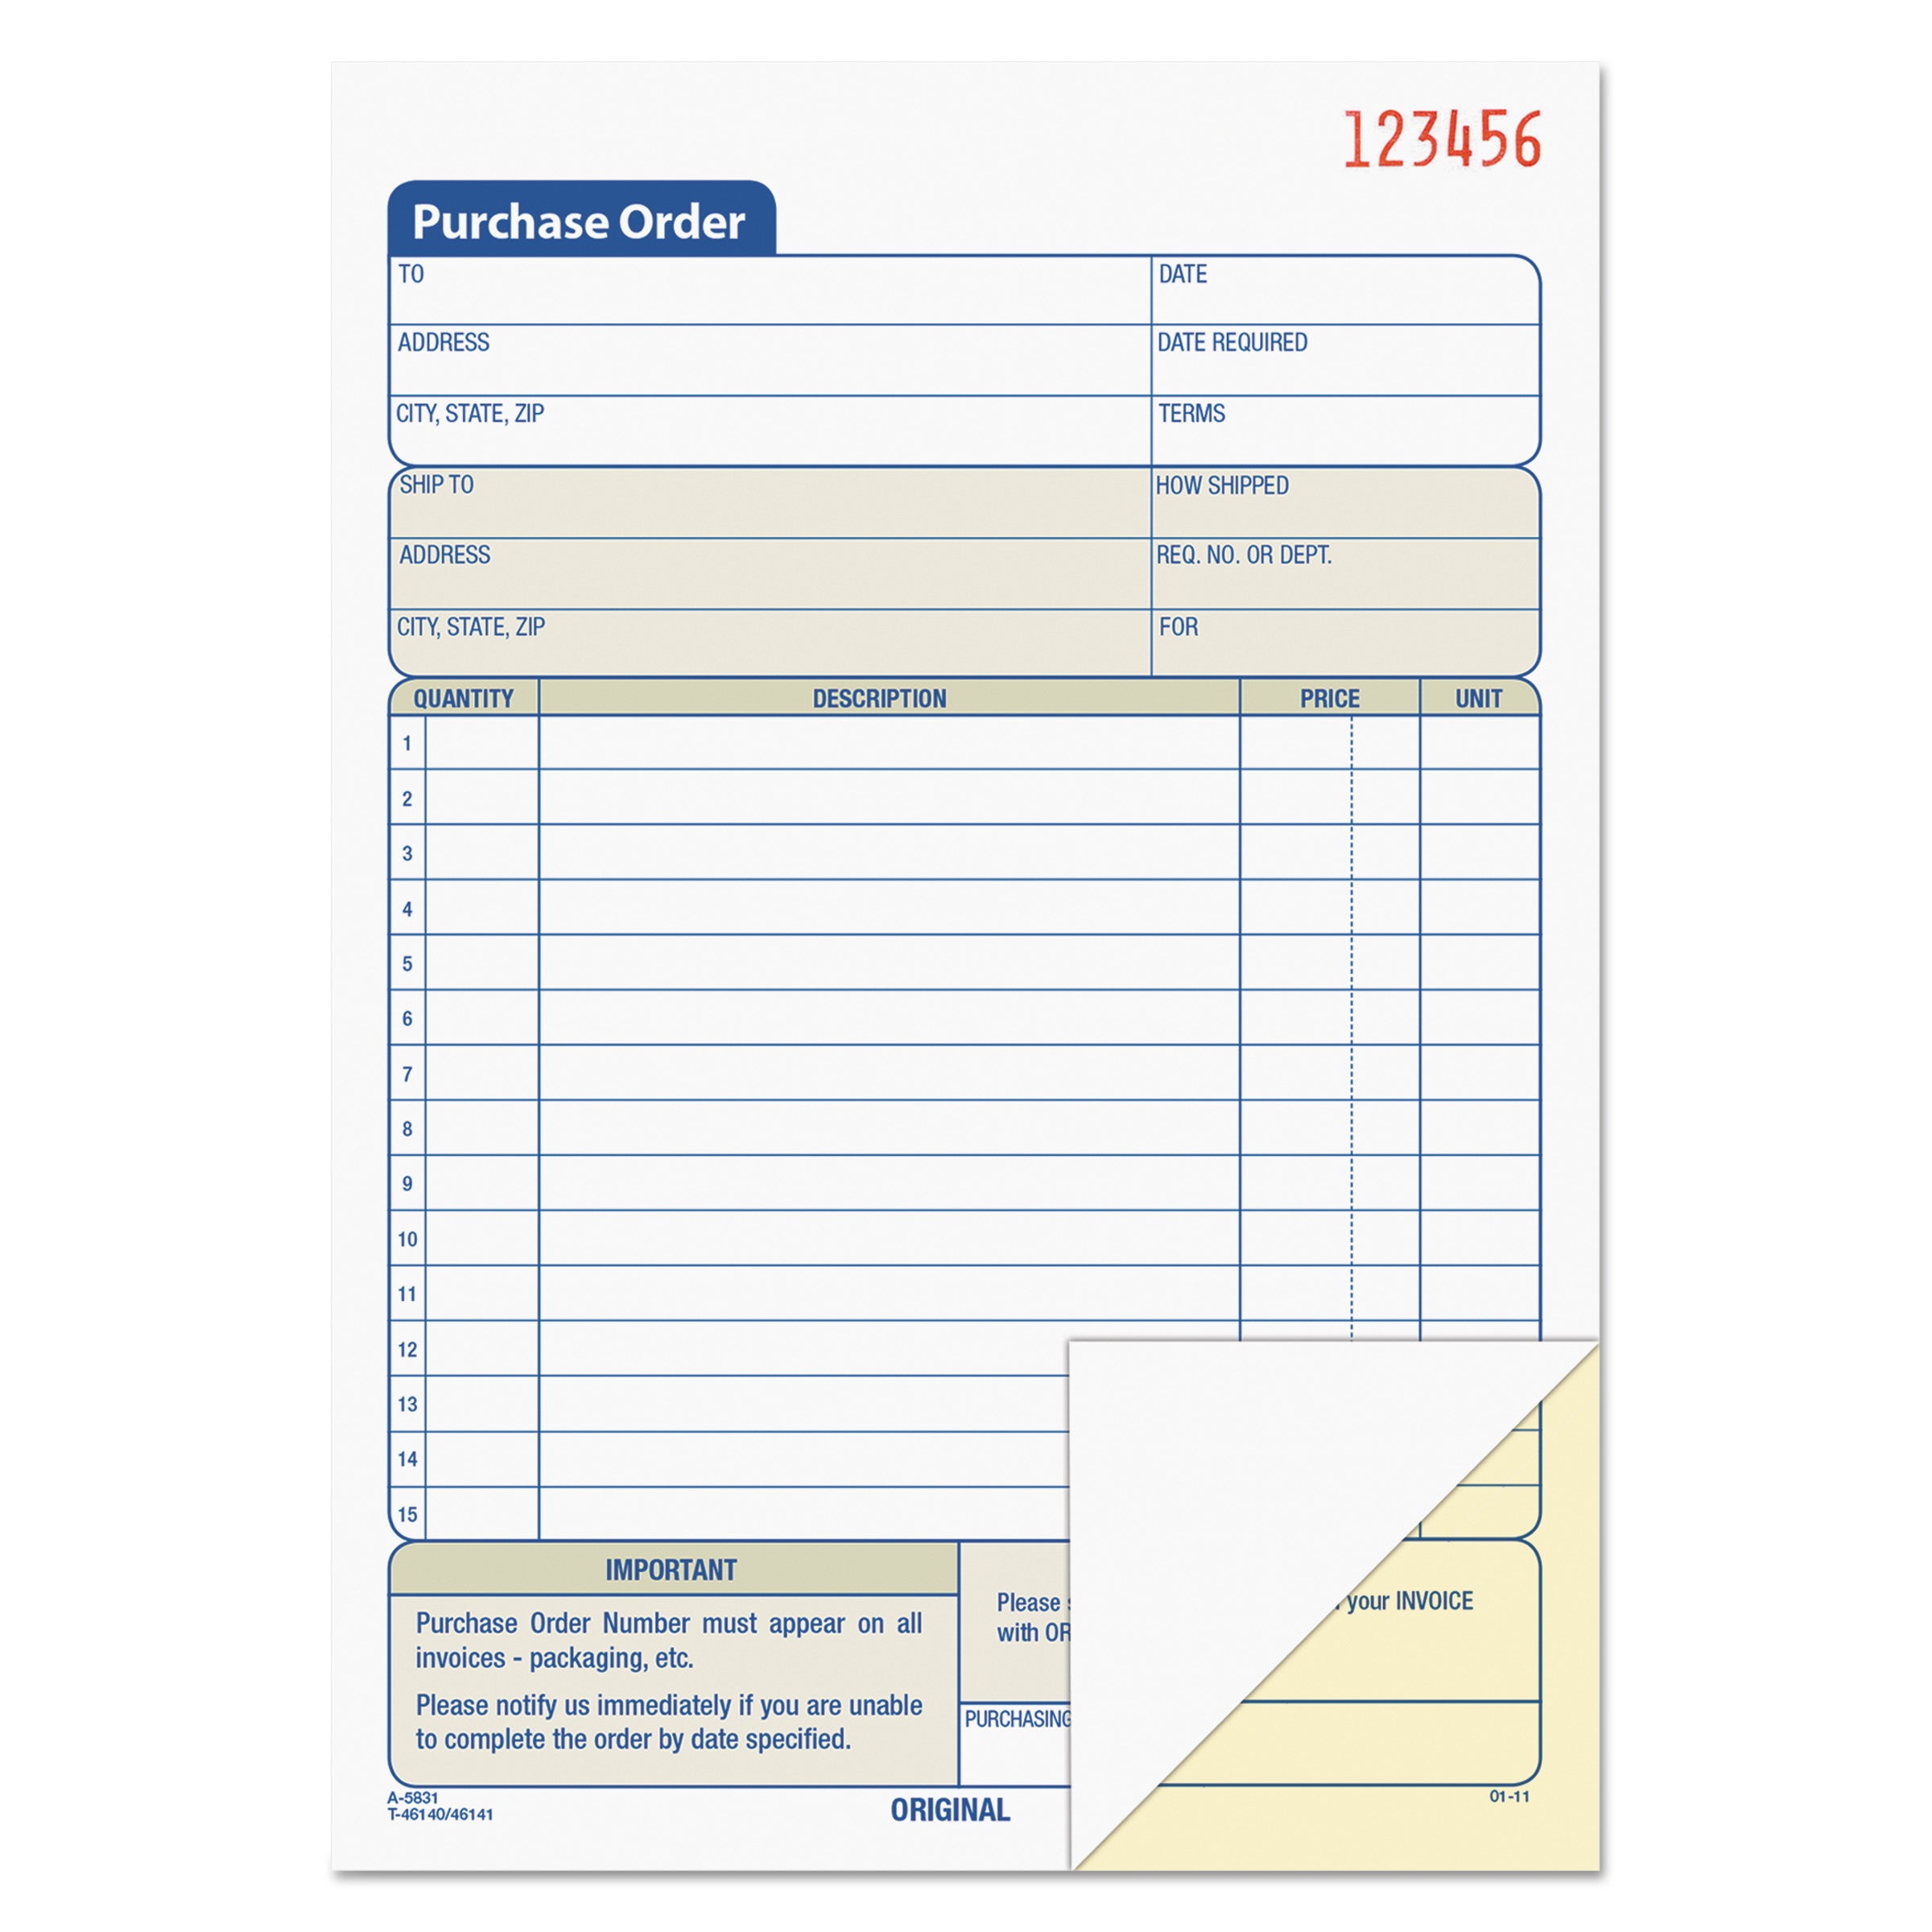 Purchase Order Book, 12 Lines, Two-Part Carbonless, 5.56 x 8.44, 50 Forms Total - 